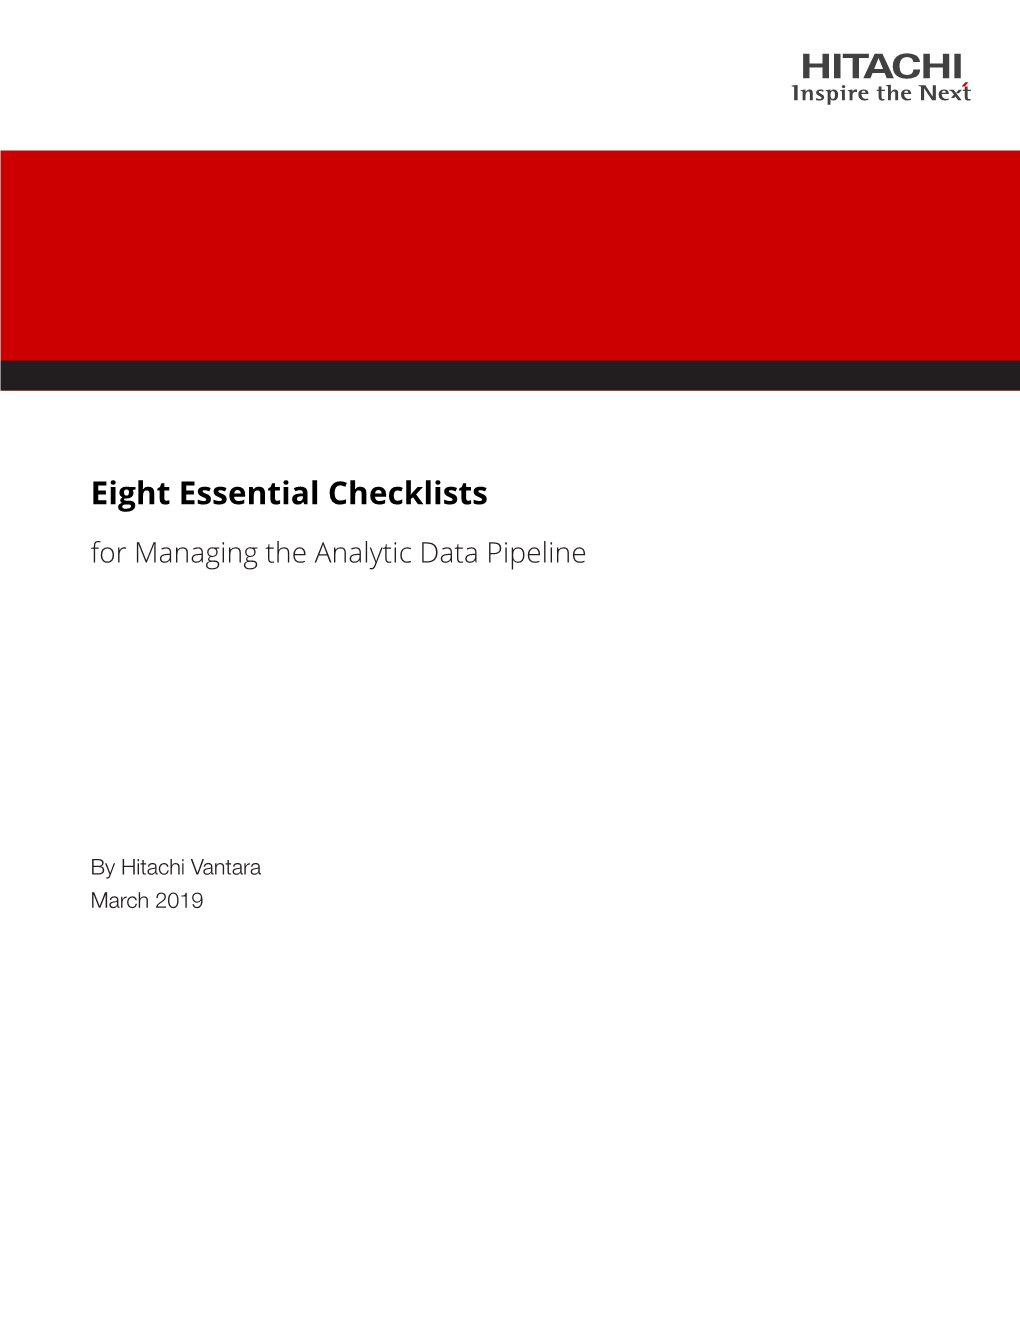 Eight Essential Checklists for Managing Analytic Data Pipeline